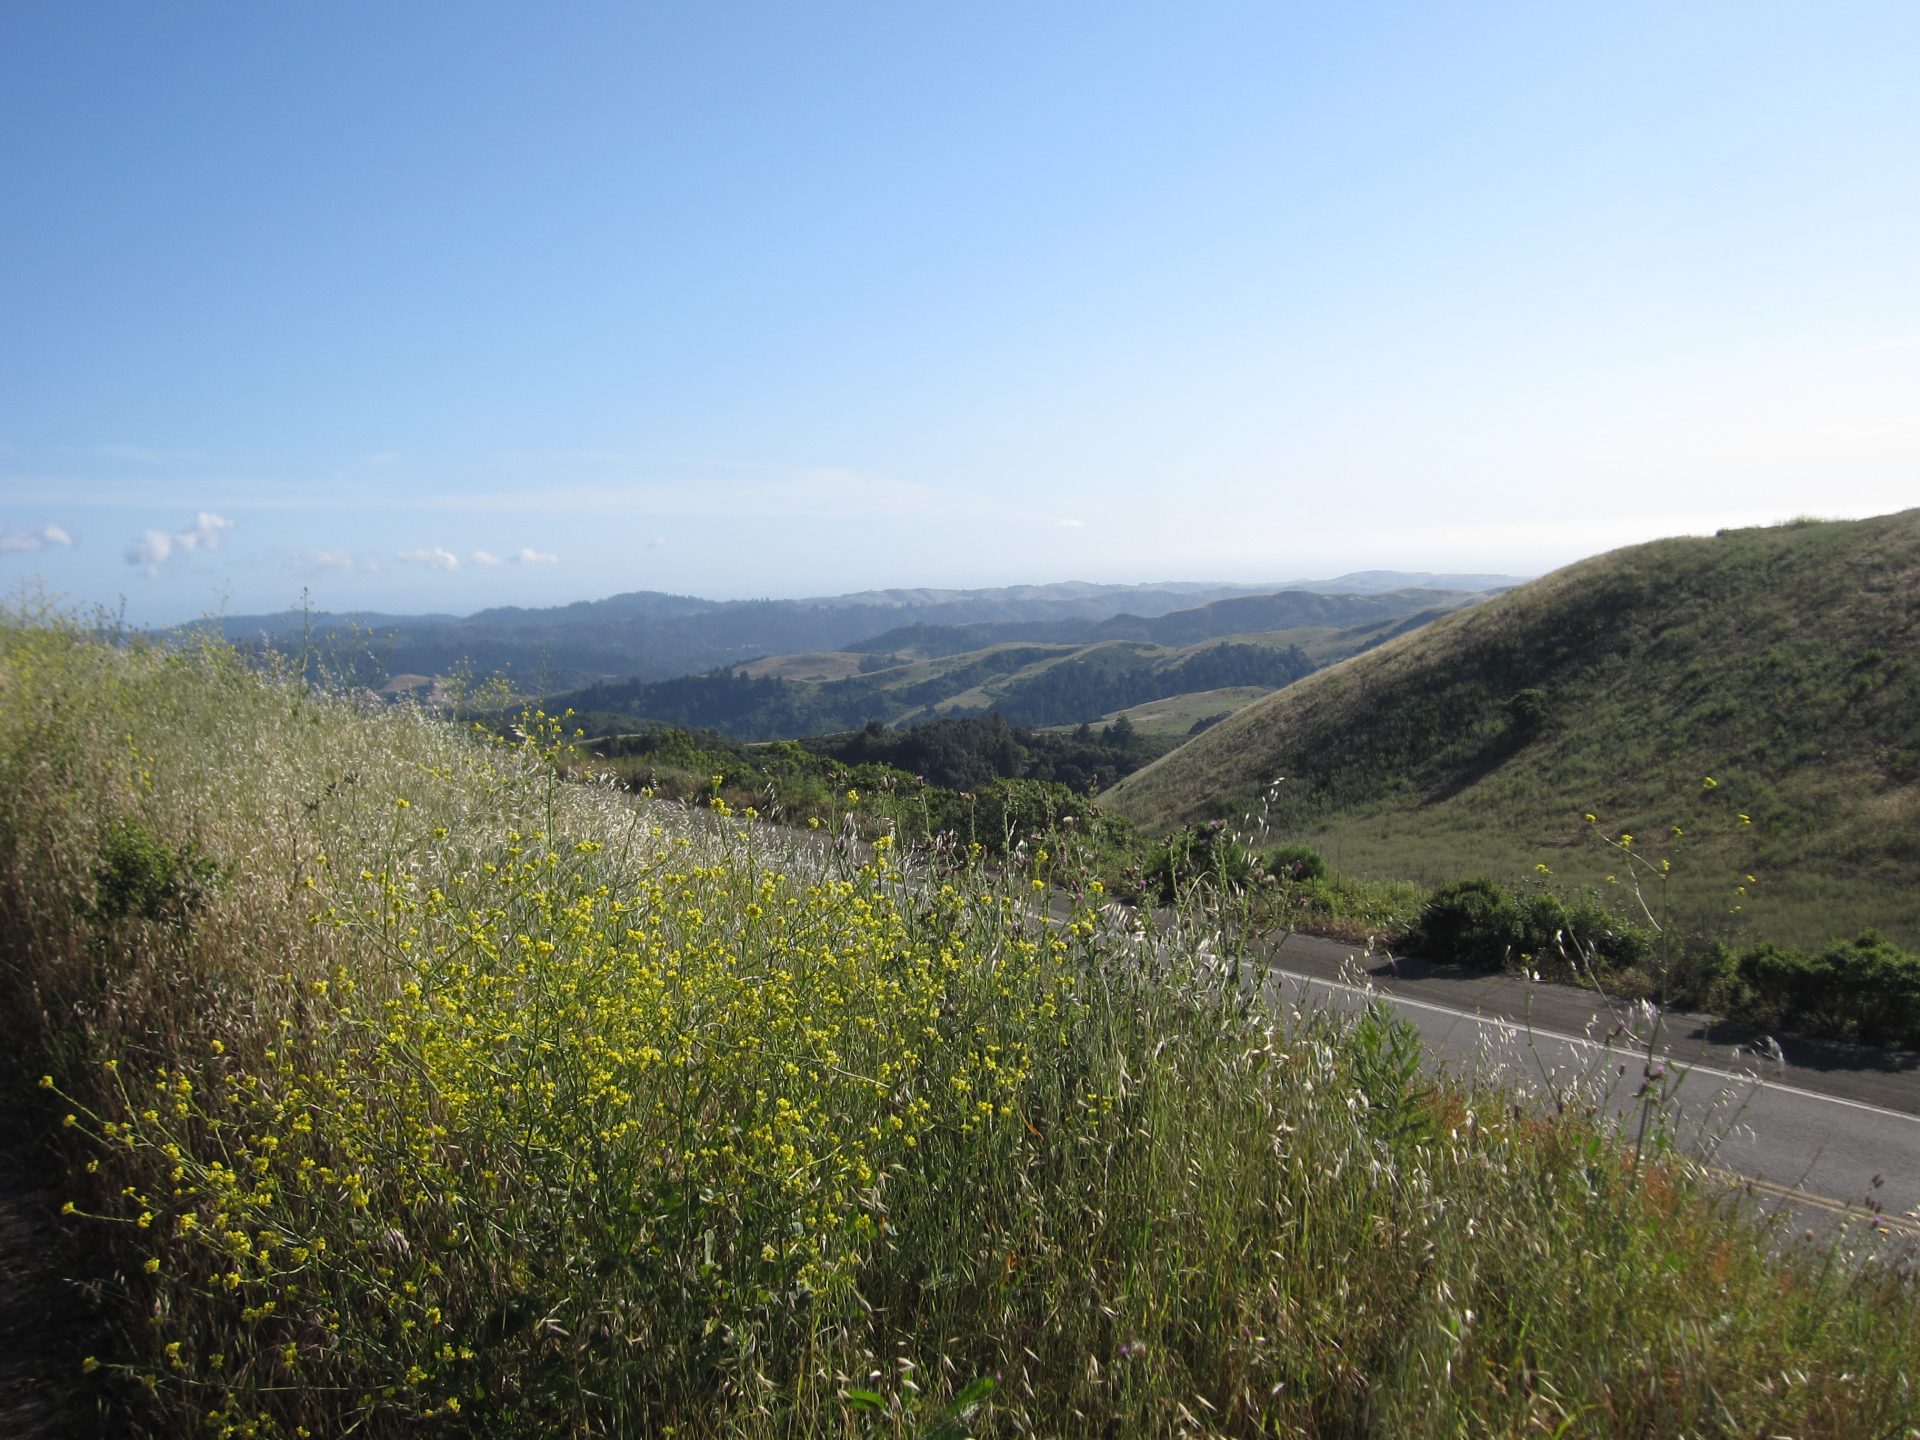 Urge Caltrans to Stop Broadcast Spraying